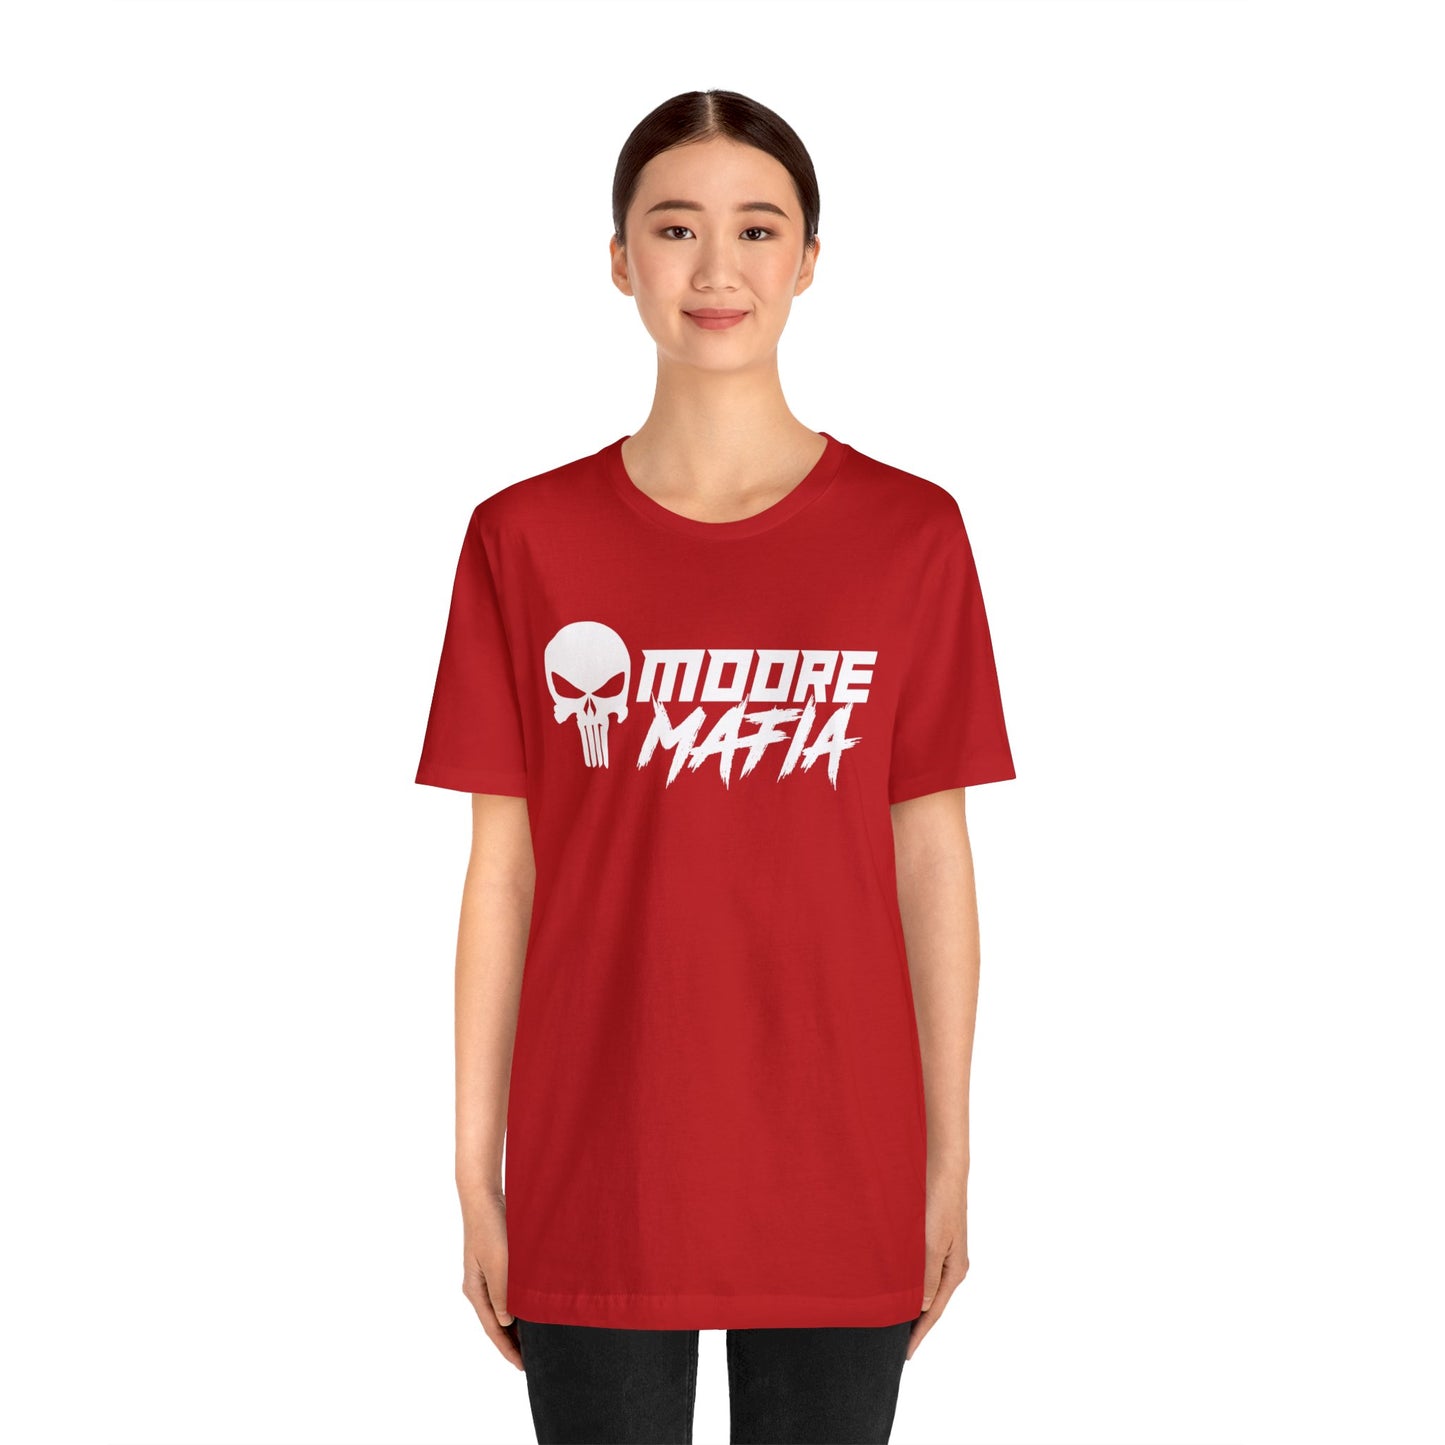 I'd Be Home Right Now Unisex T-Shirt